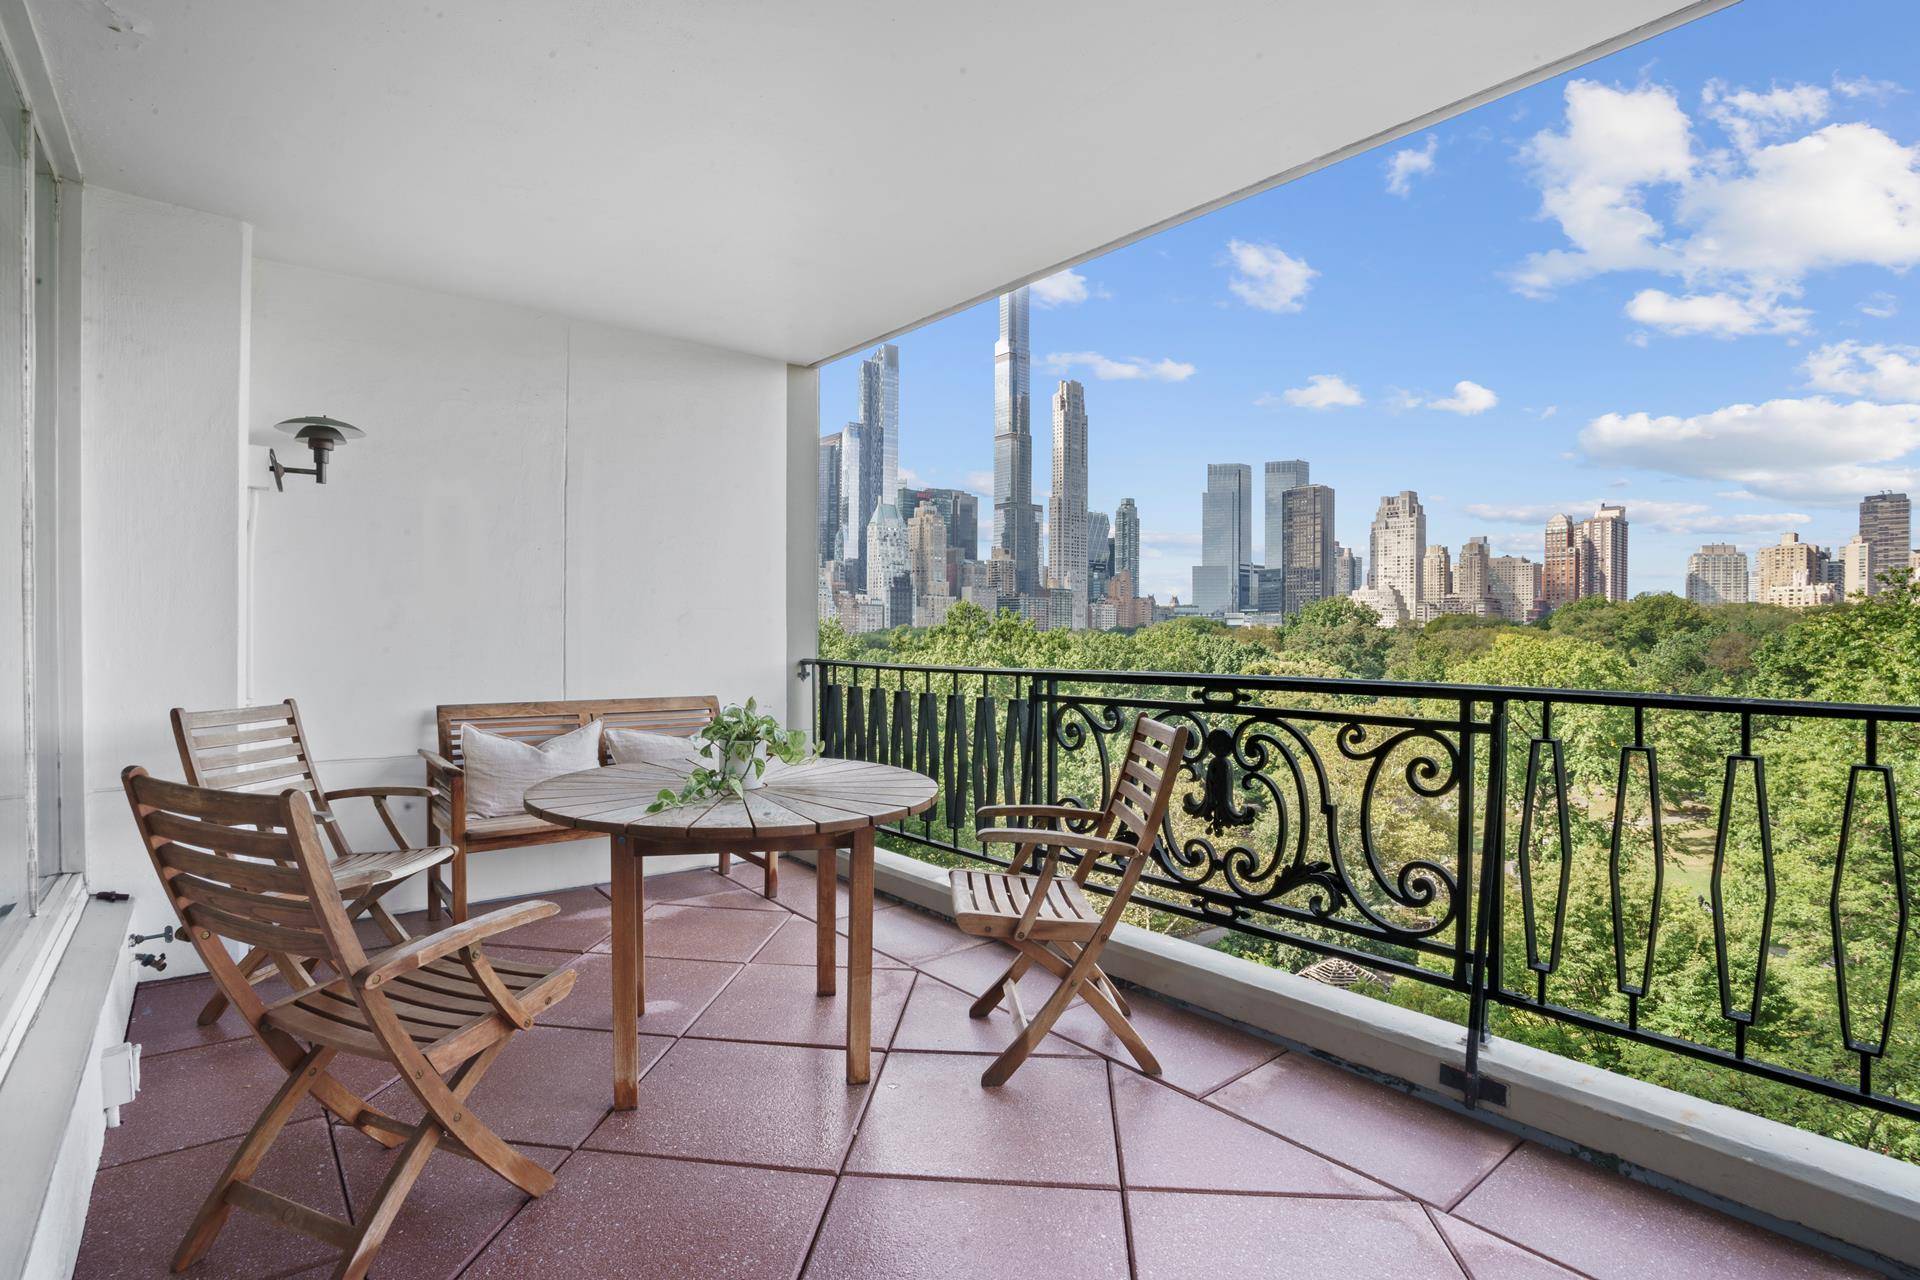 Stunning Central Park and city views from this full floor residence offering grand proportions with 3 4 bedrooms, 4.